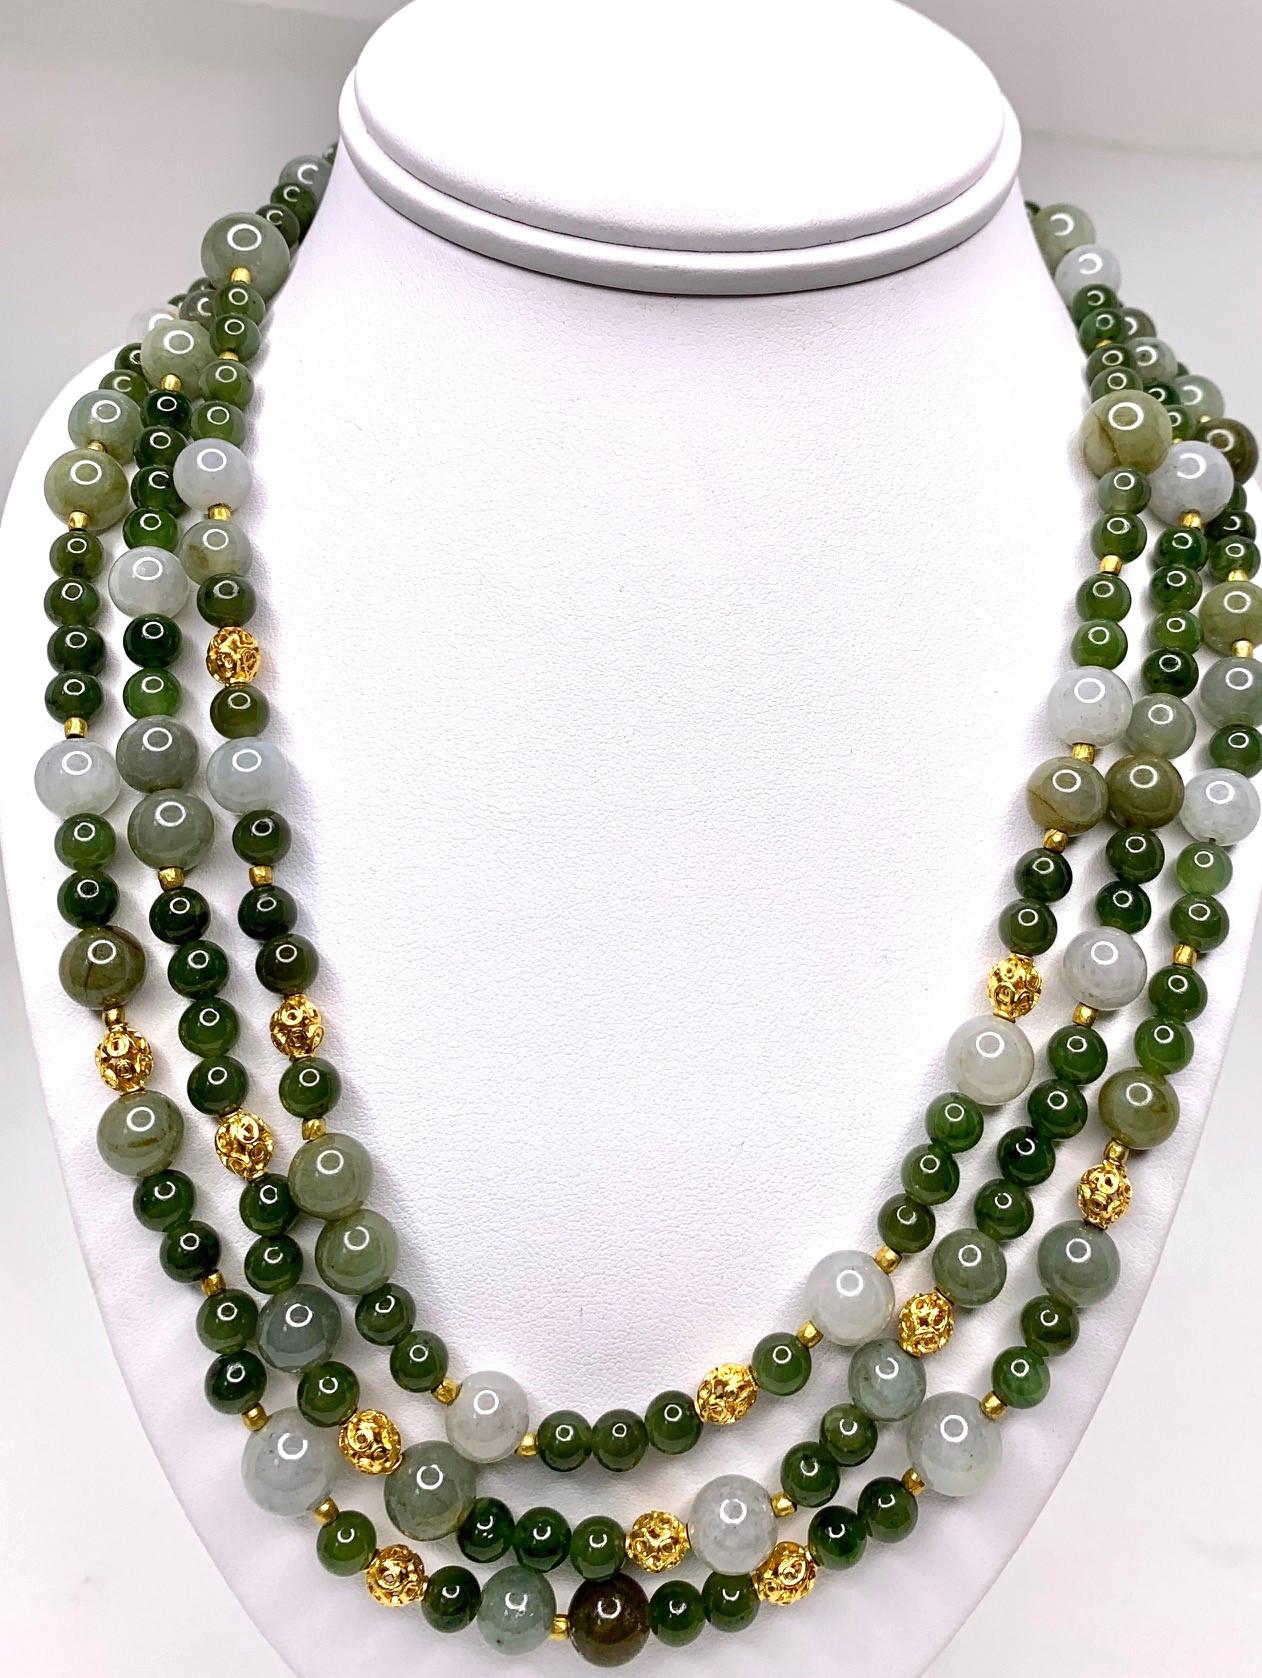 3 strand beaded necklace